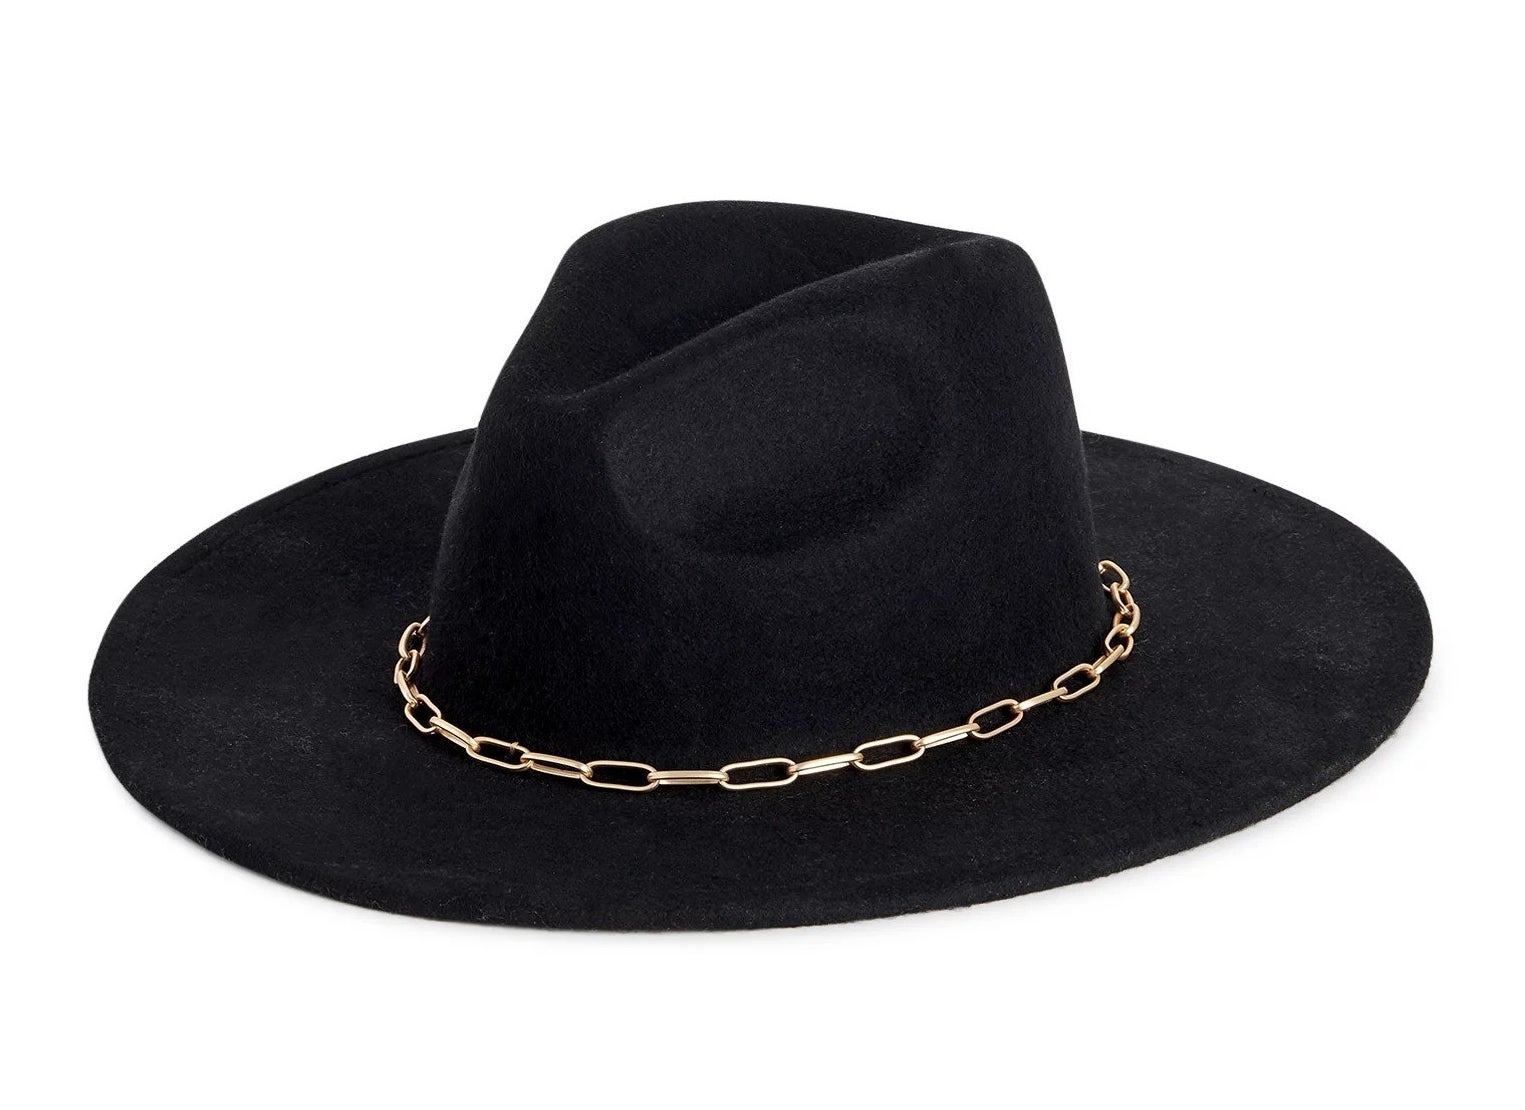 the black rancher hat with a gold-tone chain around the brim